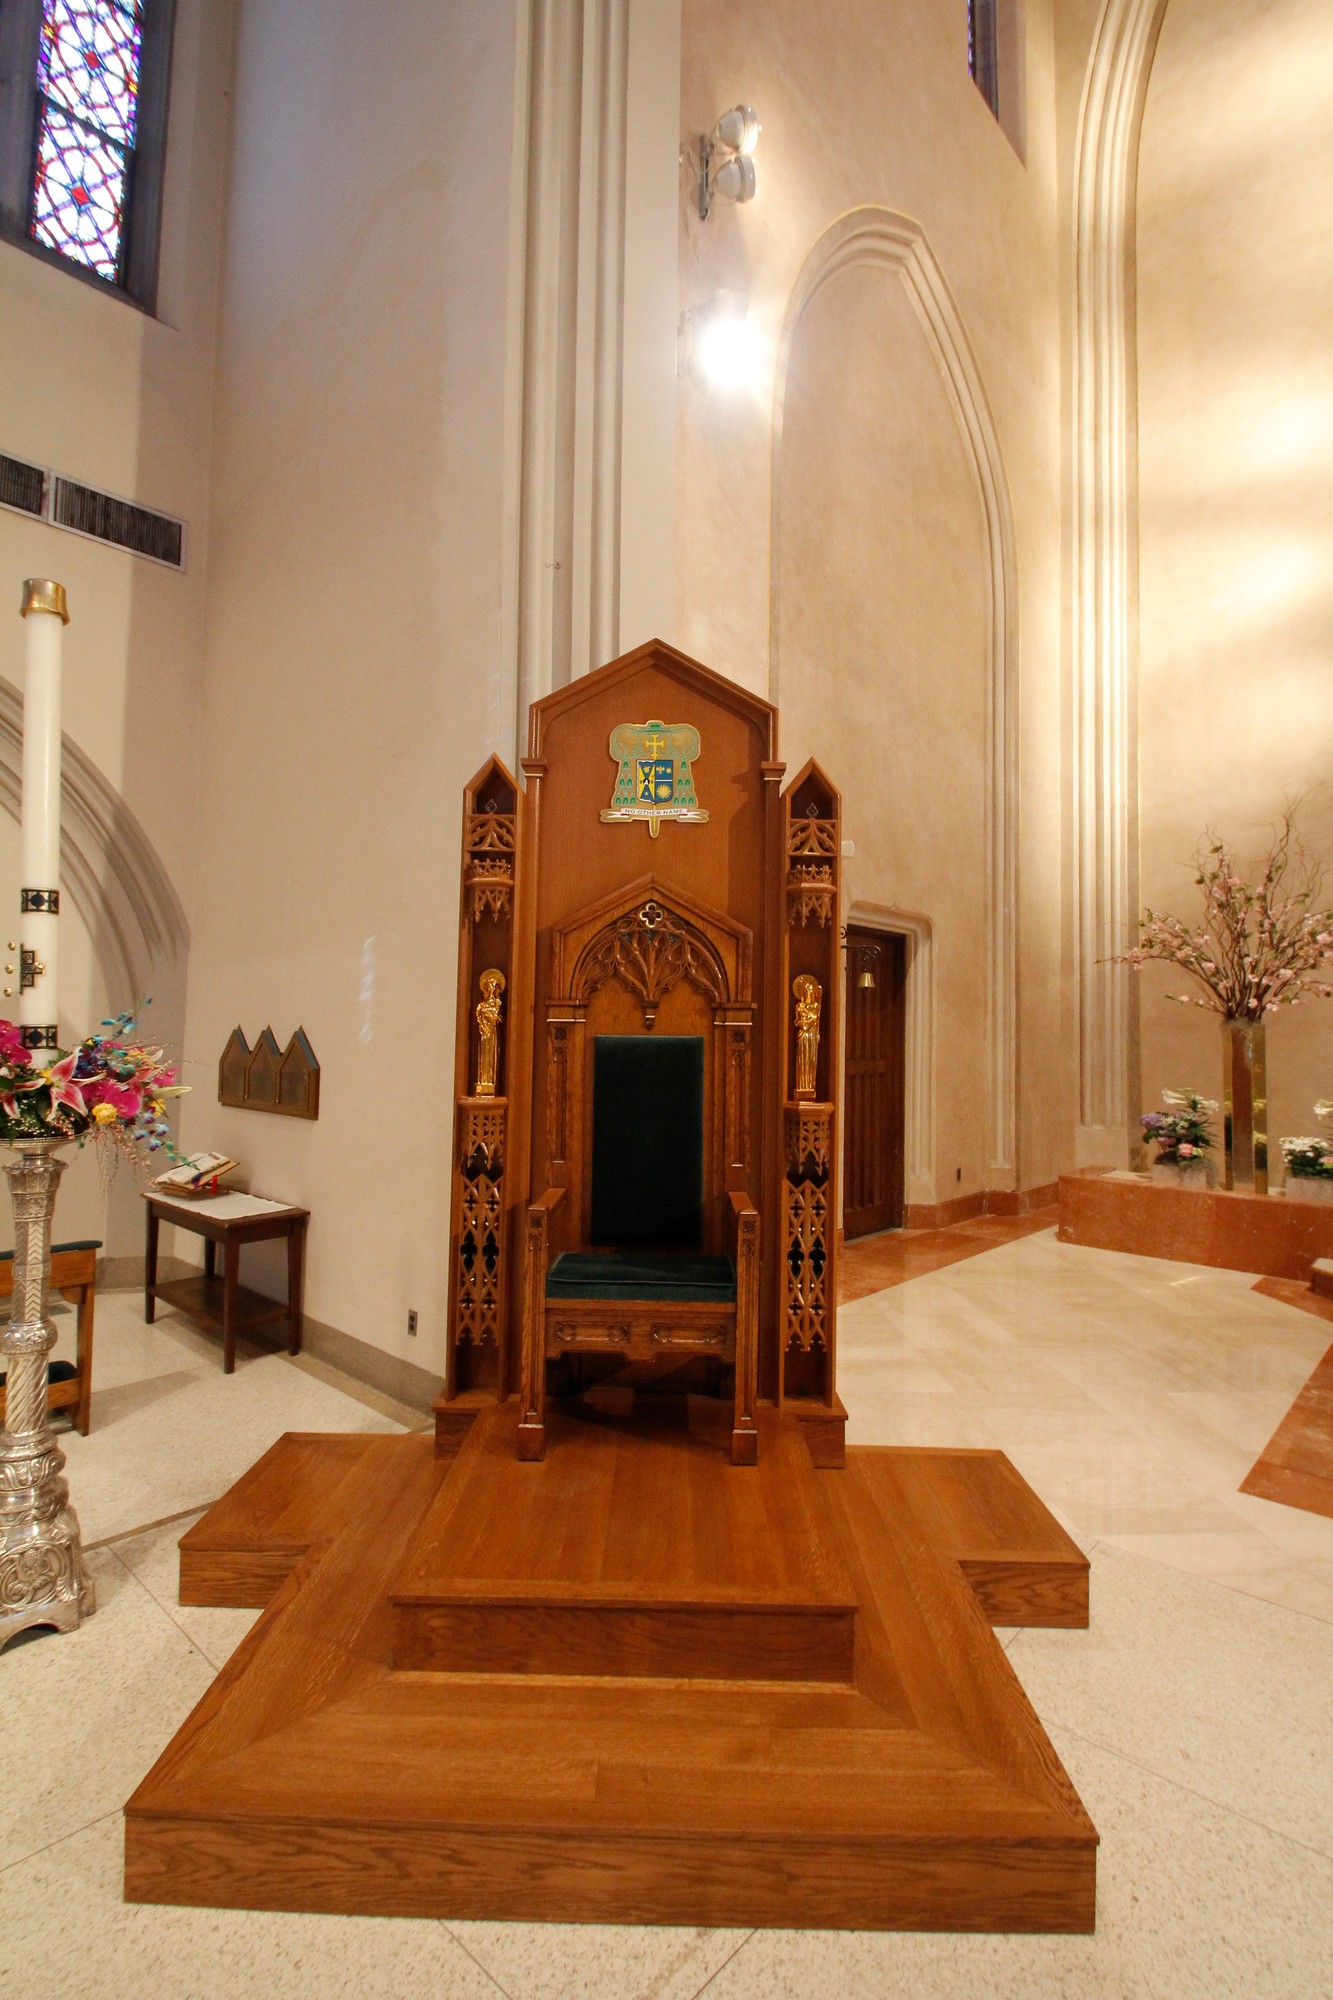 The original cathedra — the bishop’s chair — was taken out of storage and restored to its place in the cathedral.